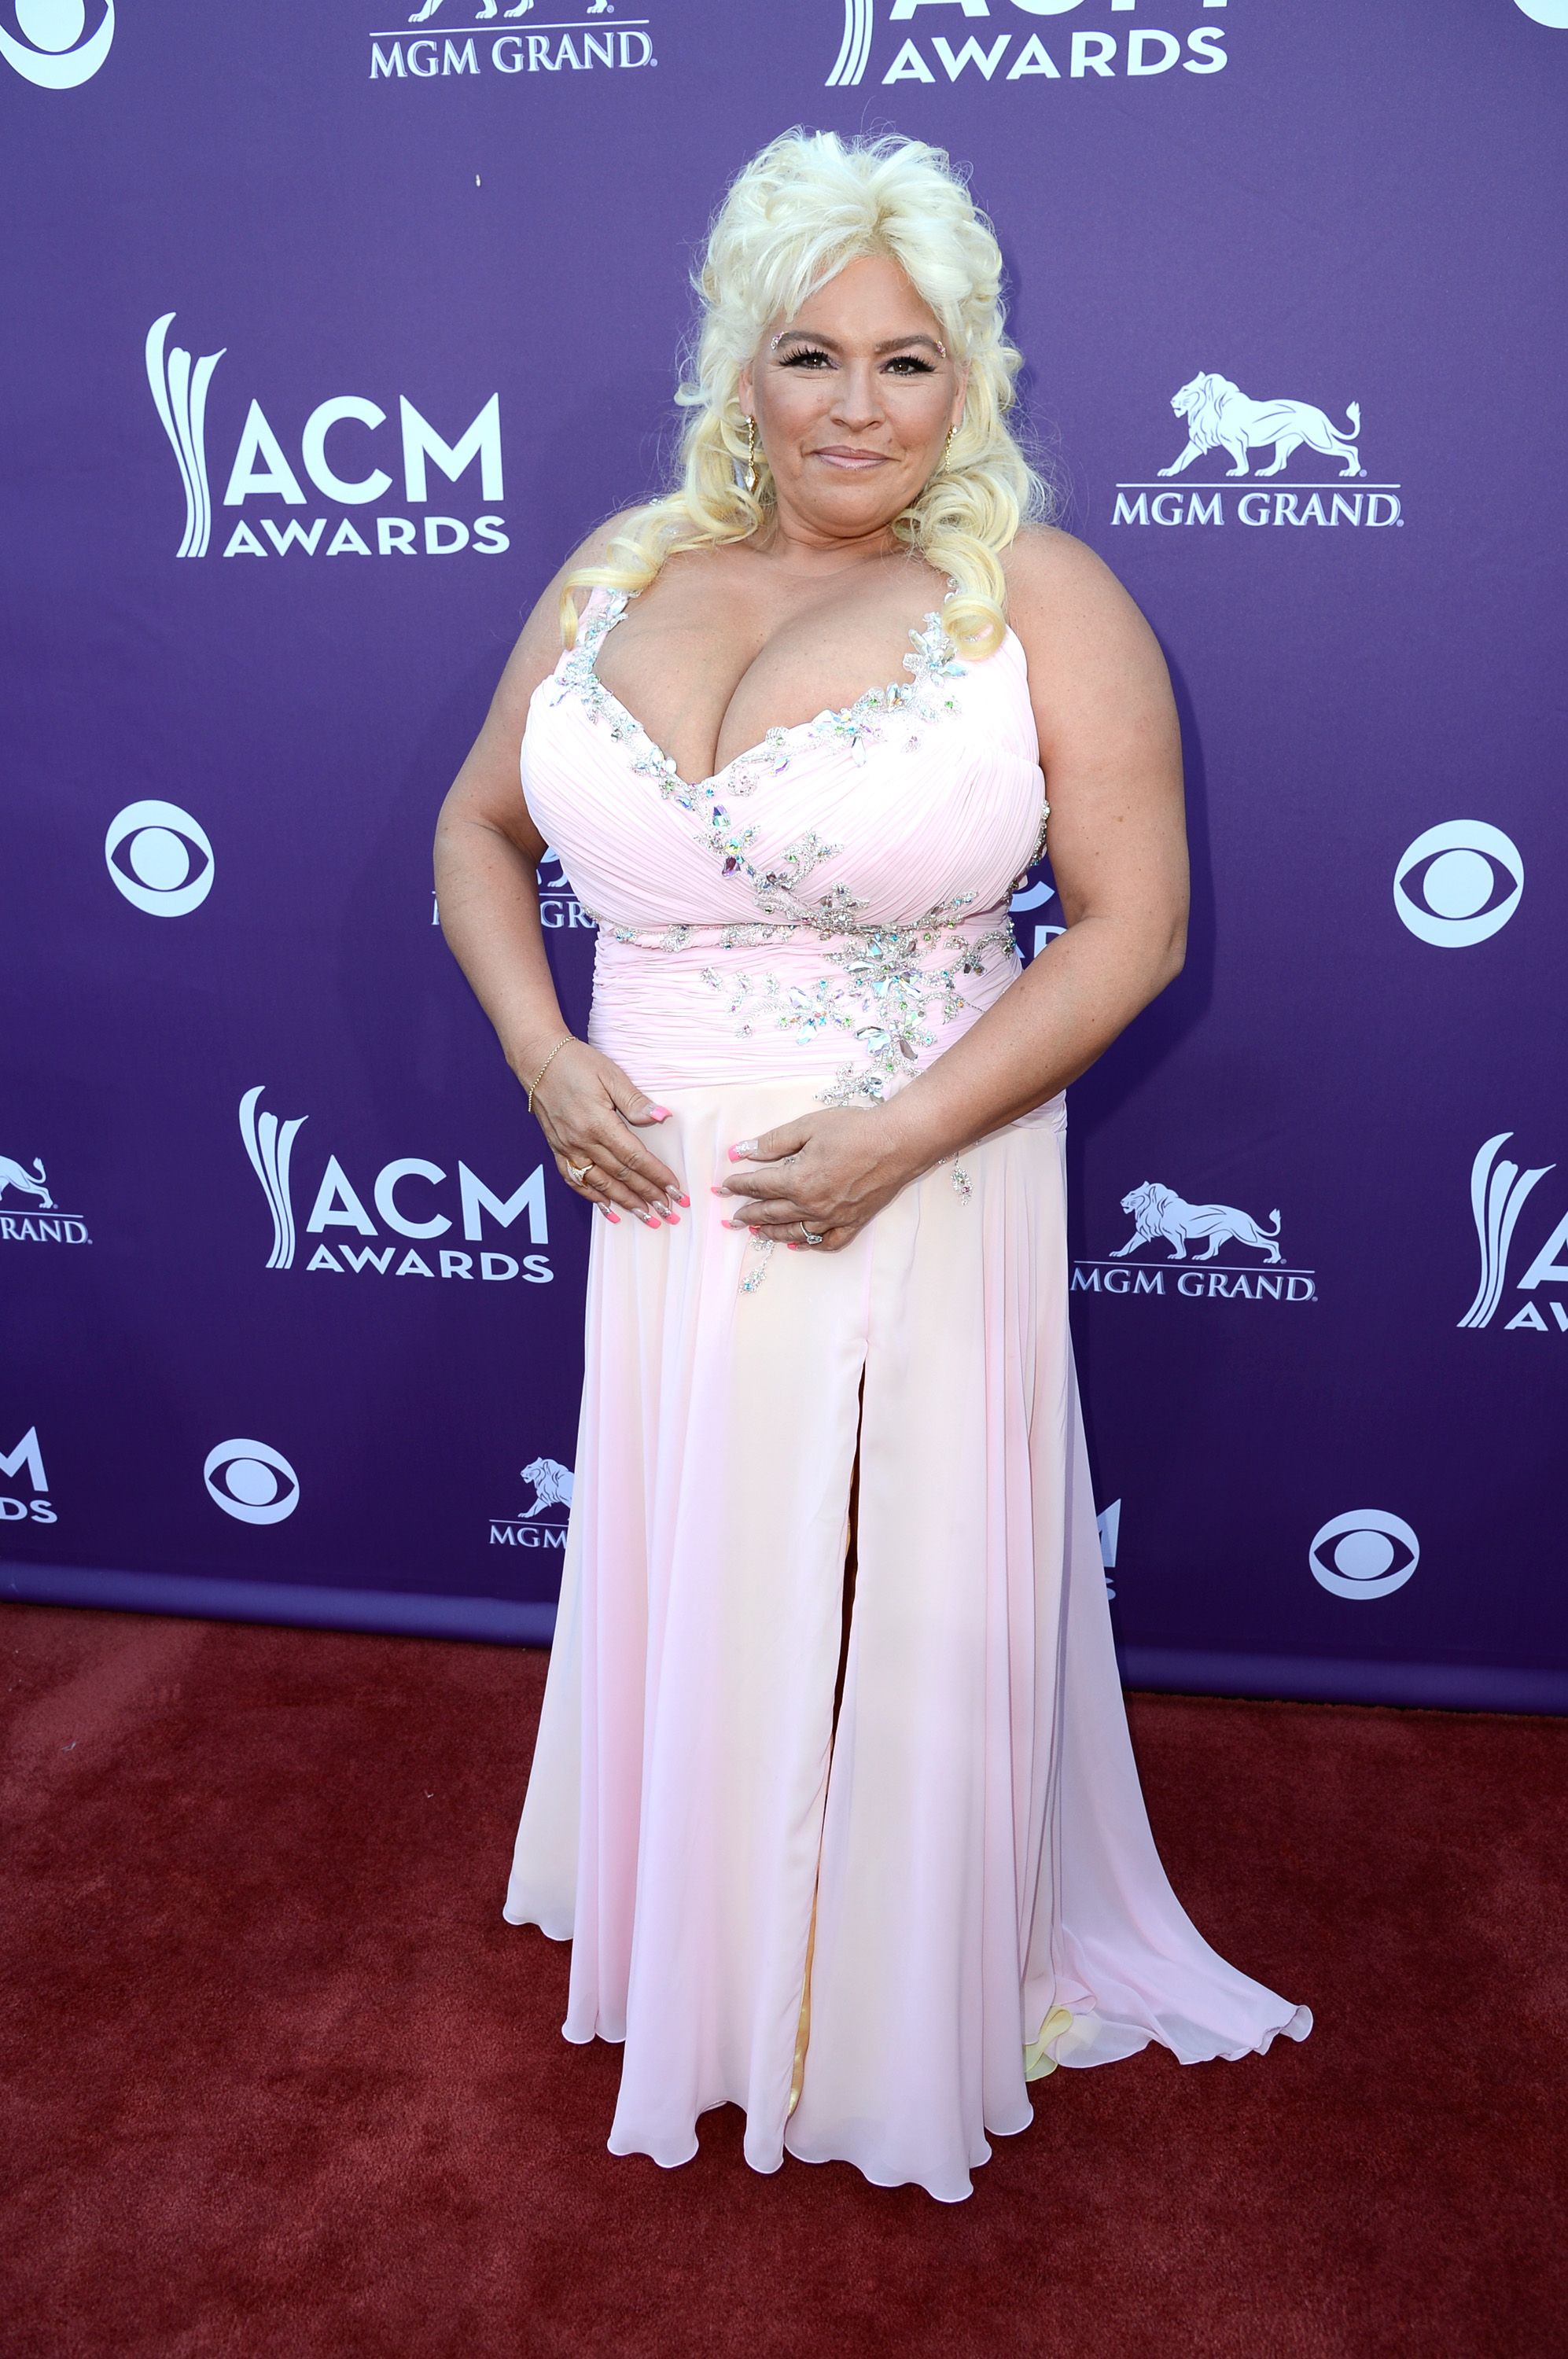 Beth Chapman at the 48th Annual Academy of Country Music Awards on April 7, 2013, in Las Vegas, Nevada | Photo: Frazer Harrison/ACMA2013/Getty Images